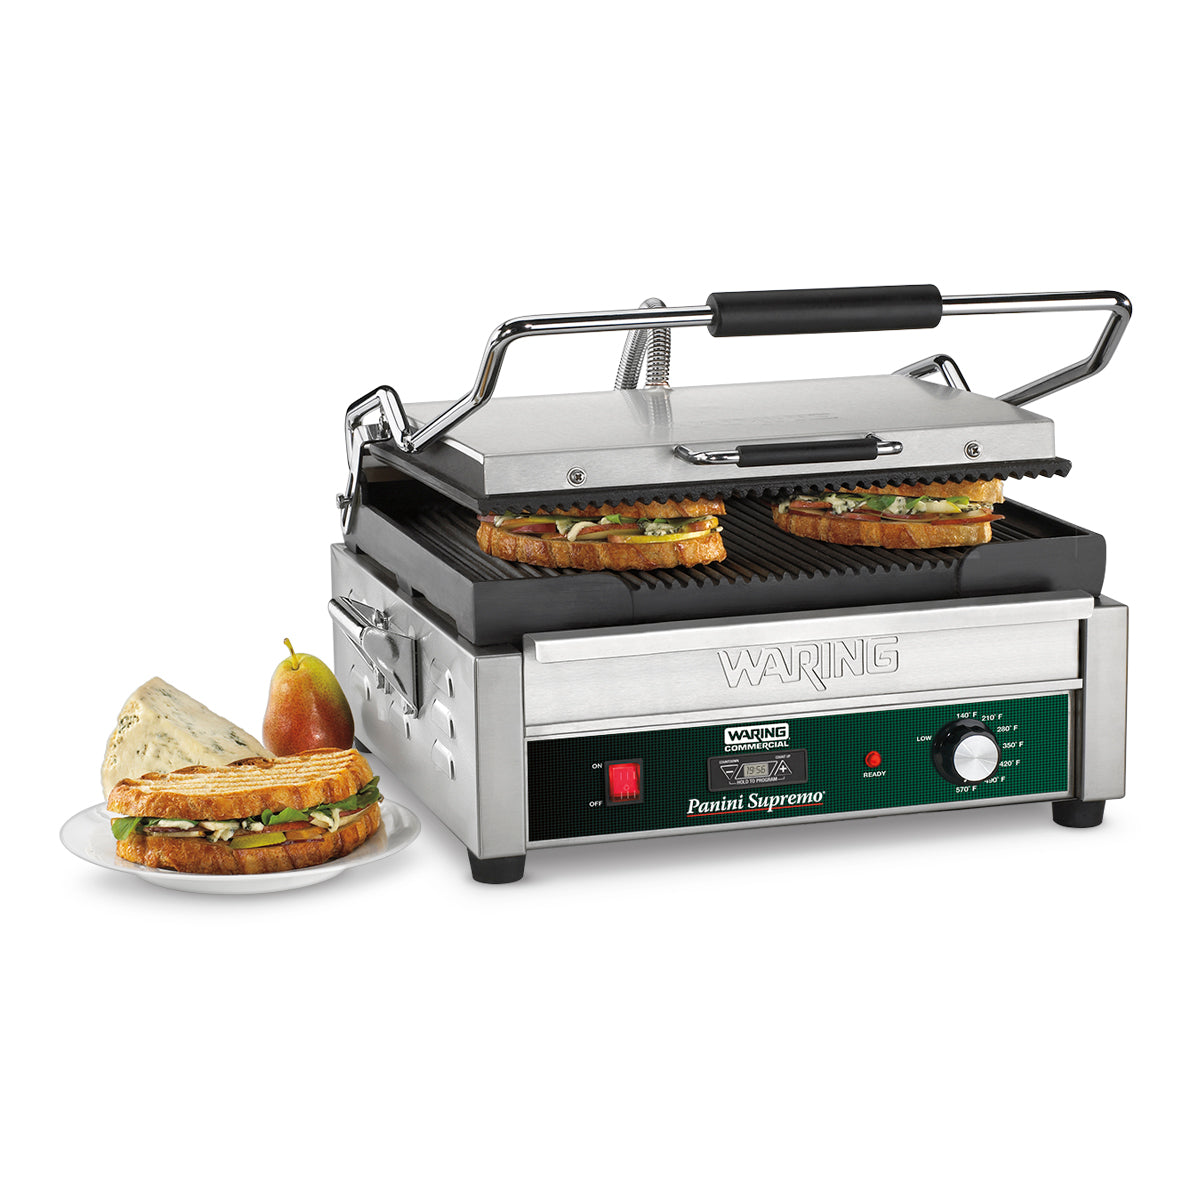 WPG250T  Panini Supremo with Timer - Large Panini Grill by Waring Commercial